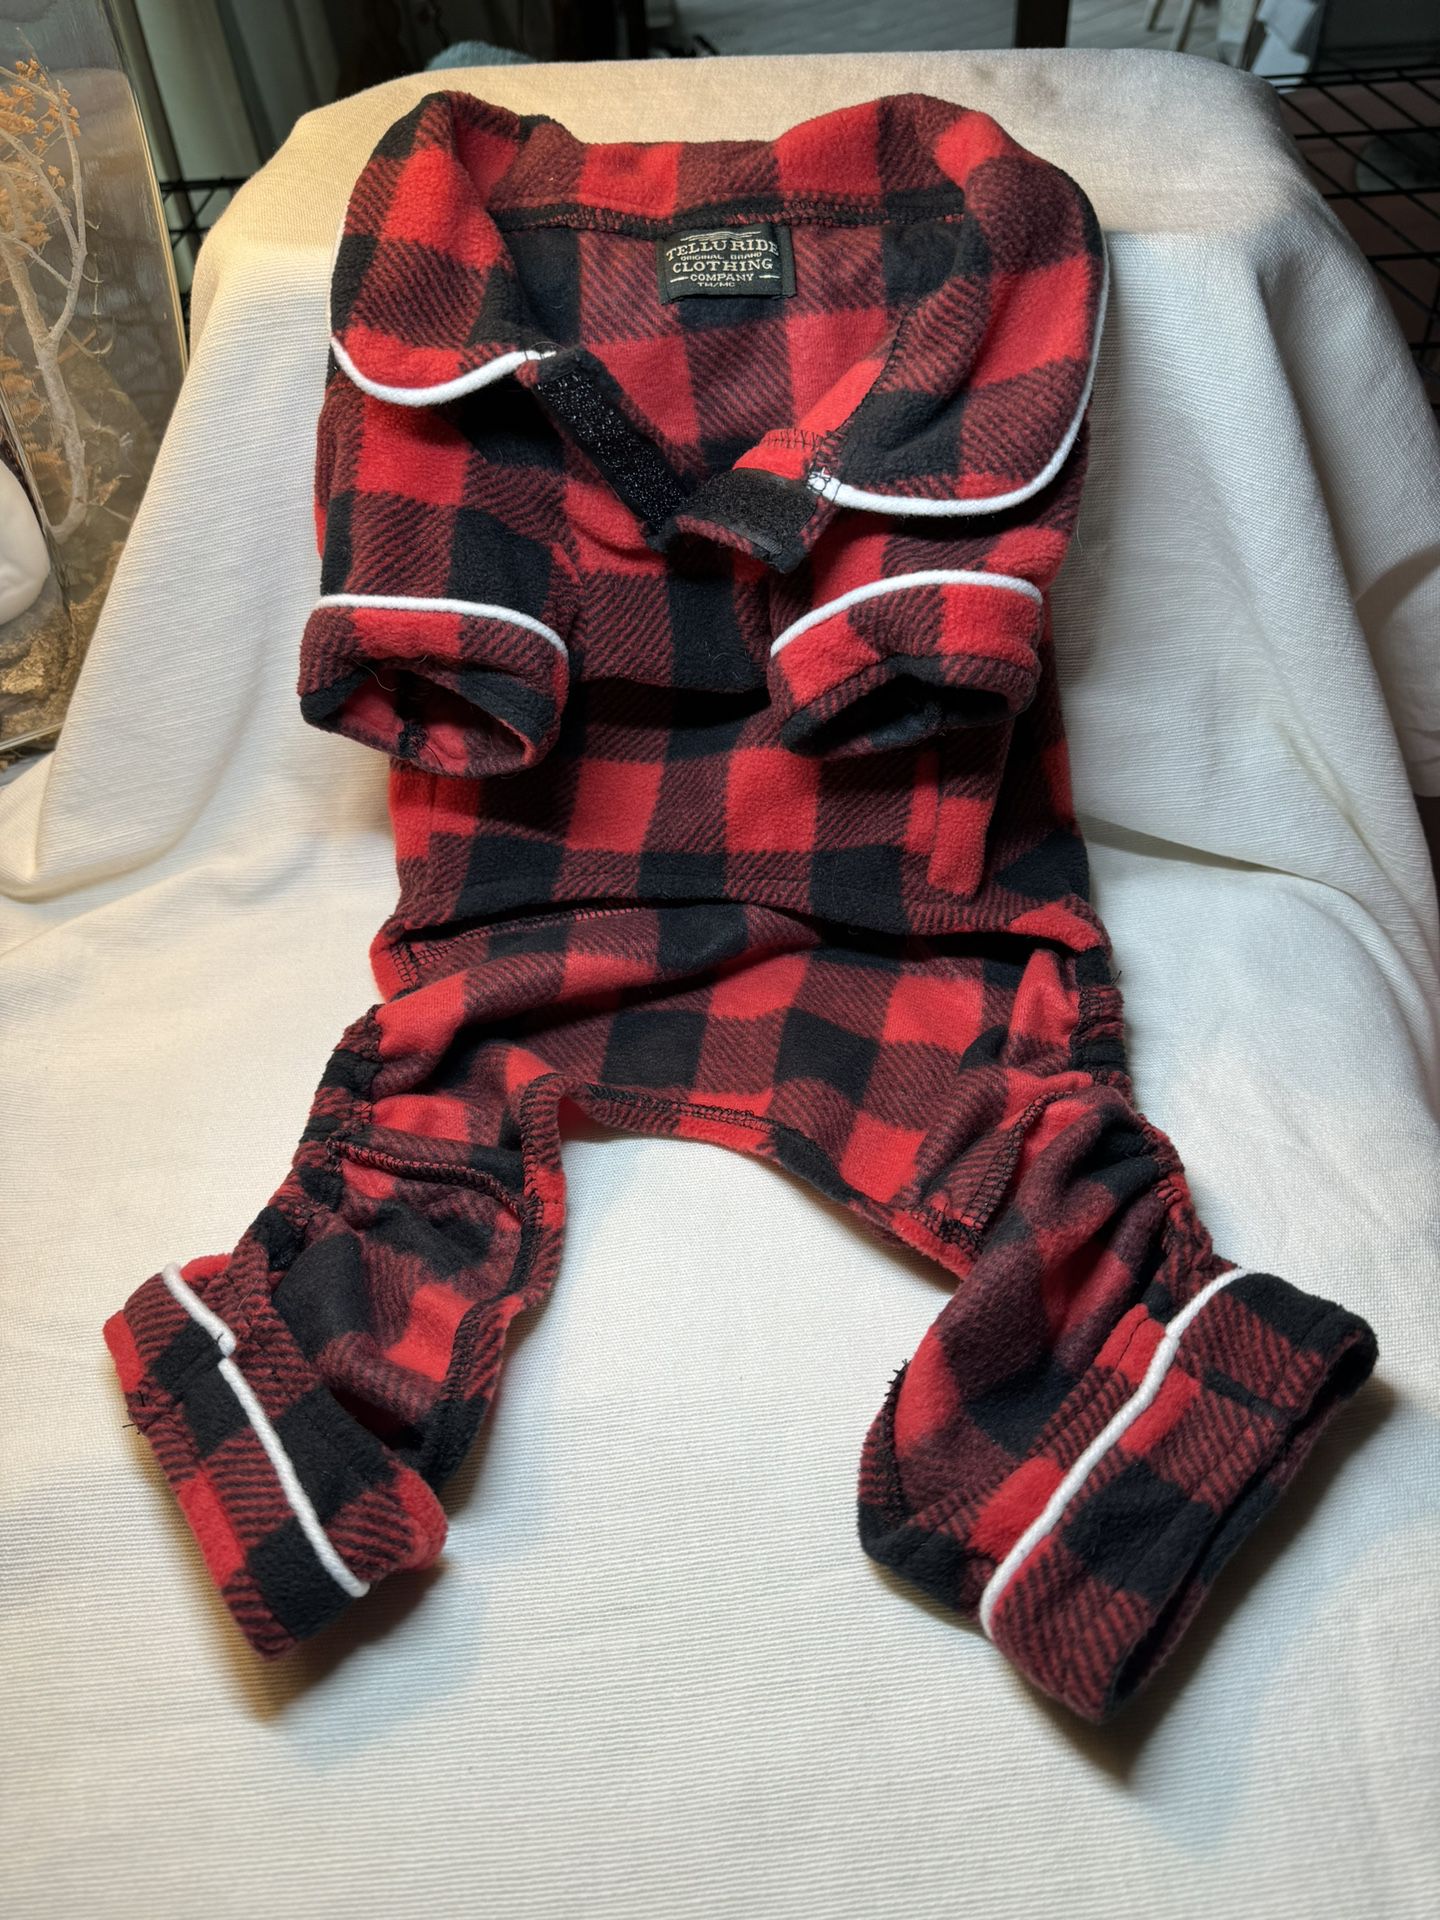 Tellu Ride Original Brand Clothing Co Dog Clothes/Outfit/Pj’s Size Small